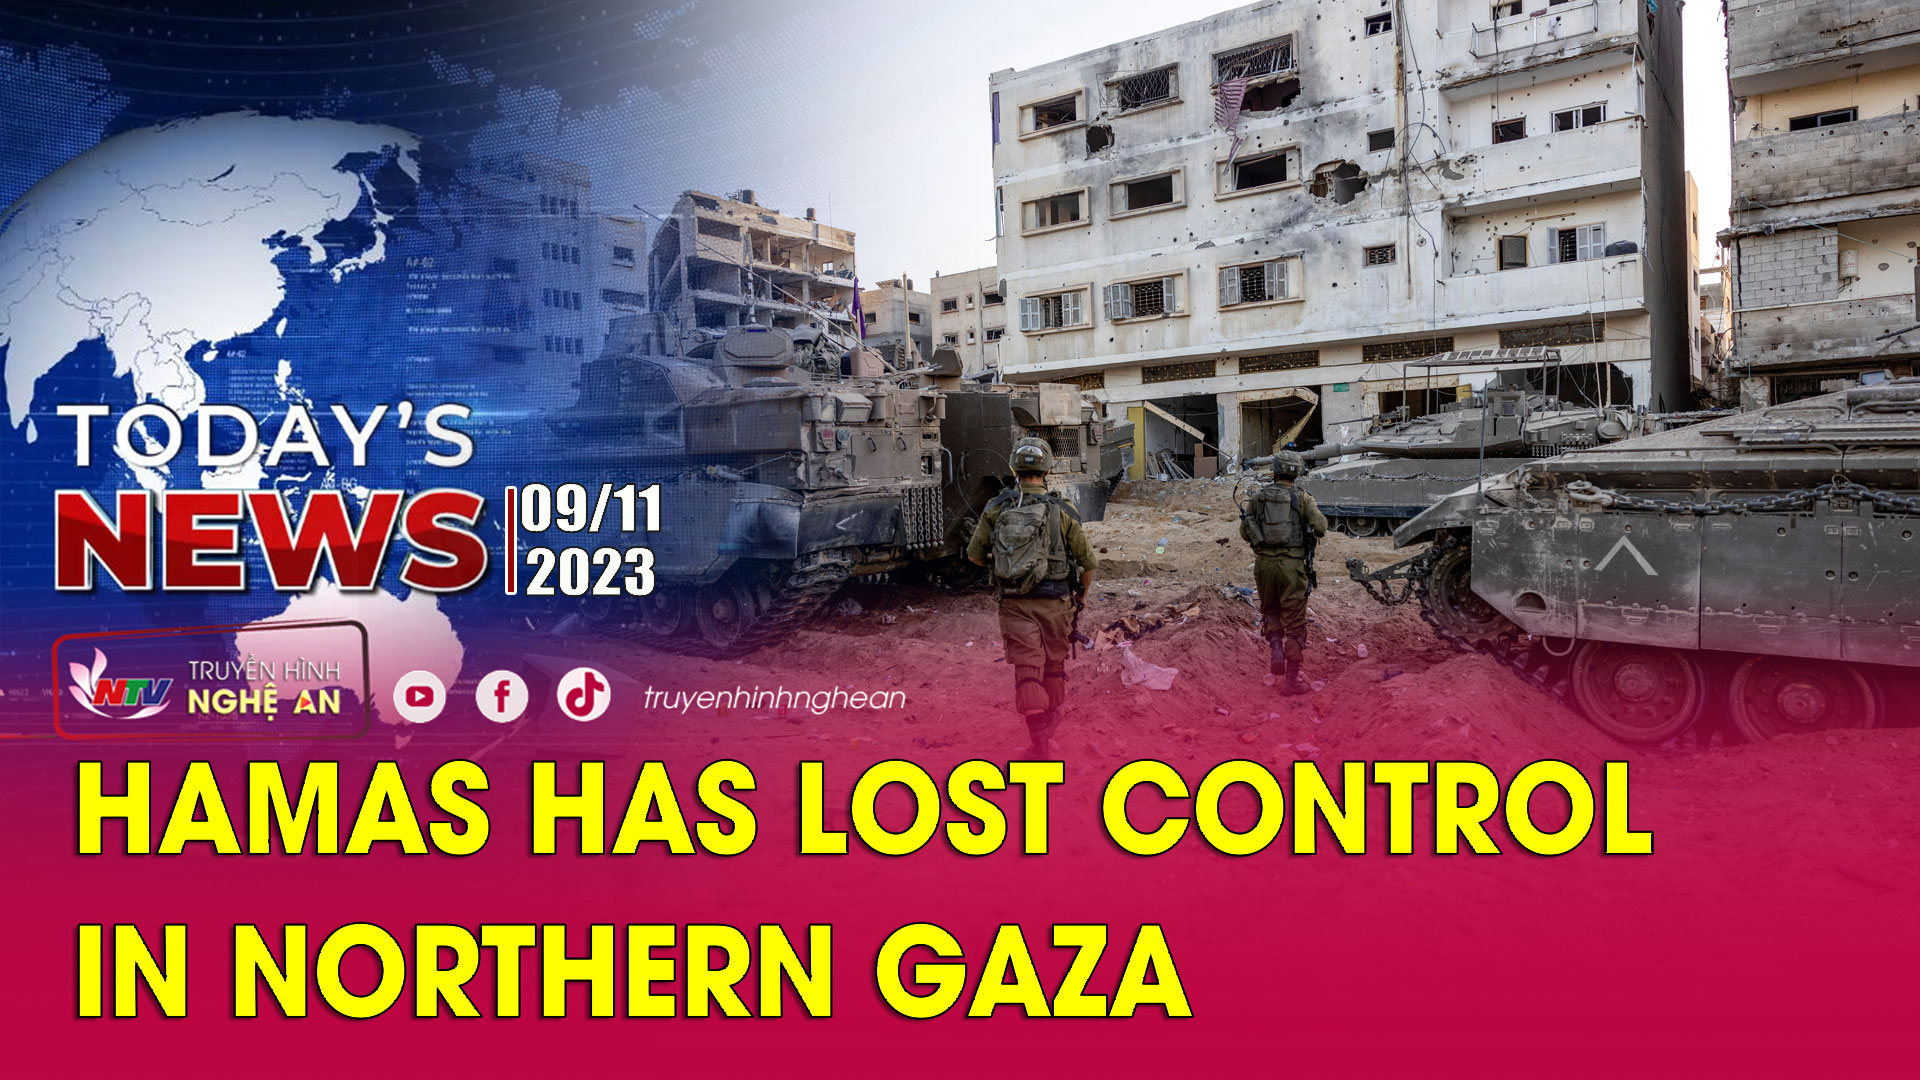 Today's News - 09/11/2023: Hamas has lost control In Northern Gaza